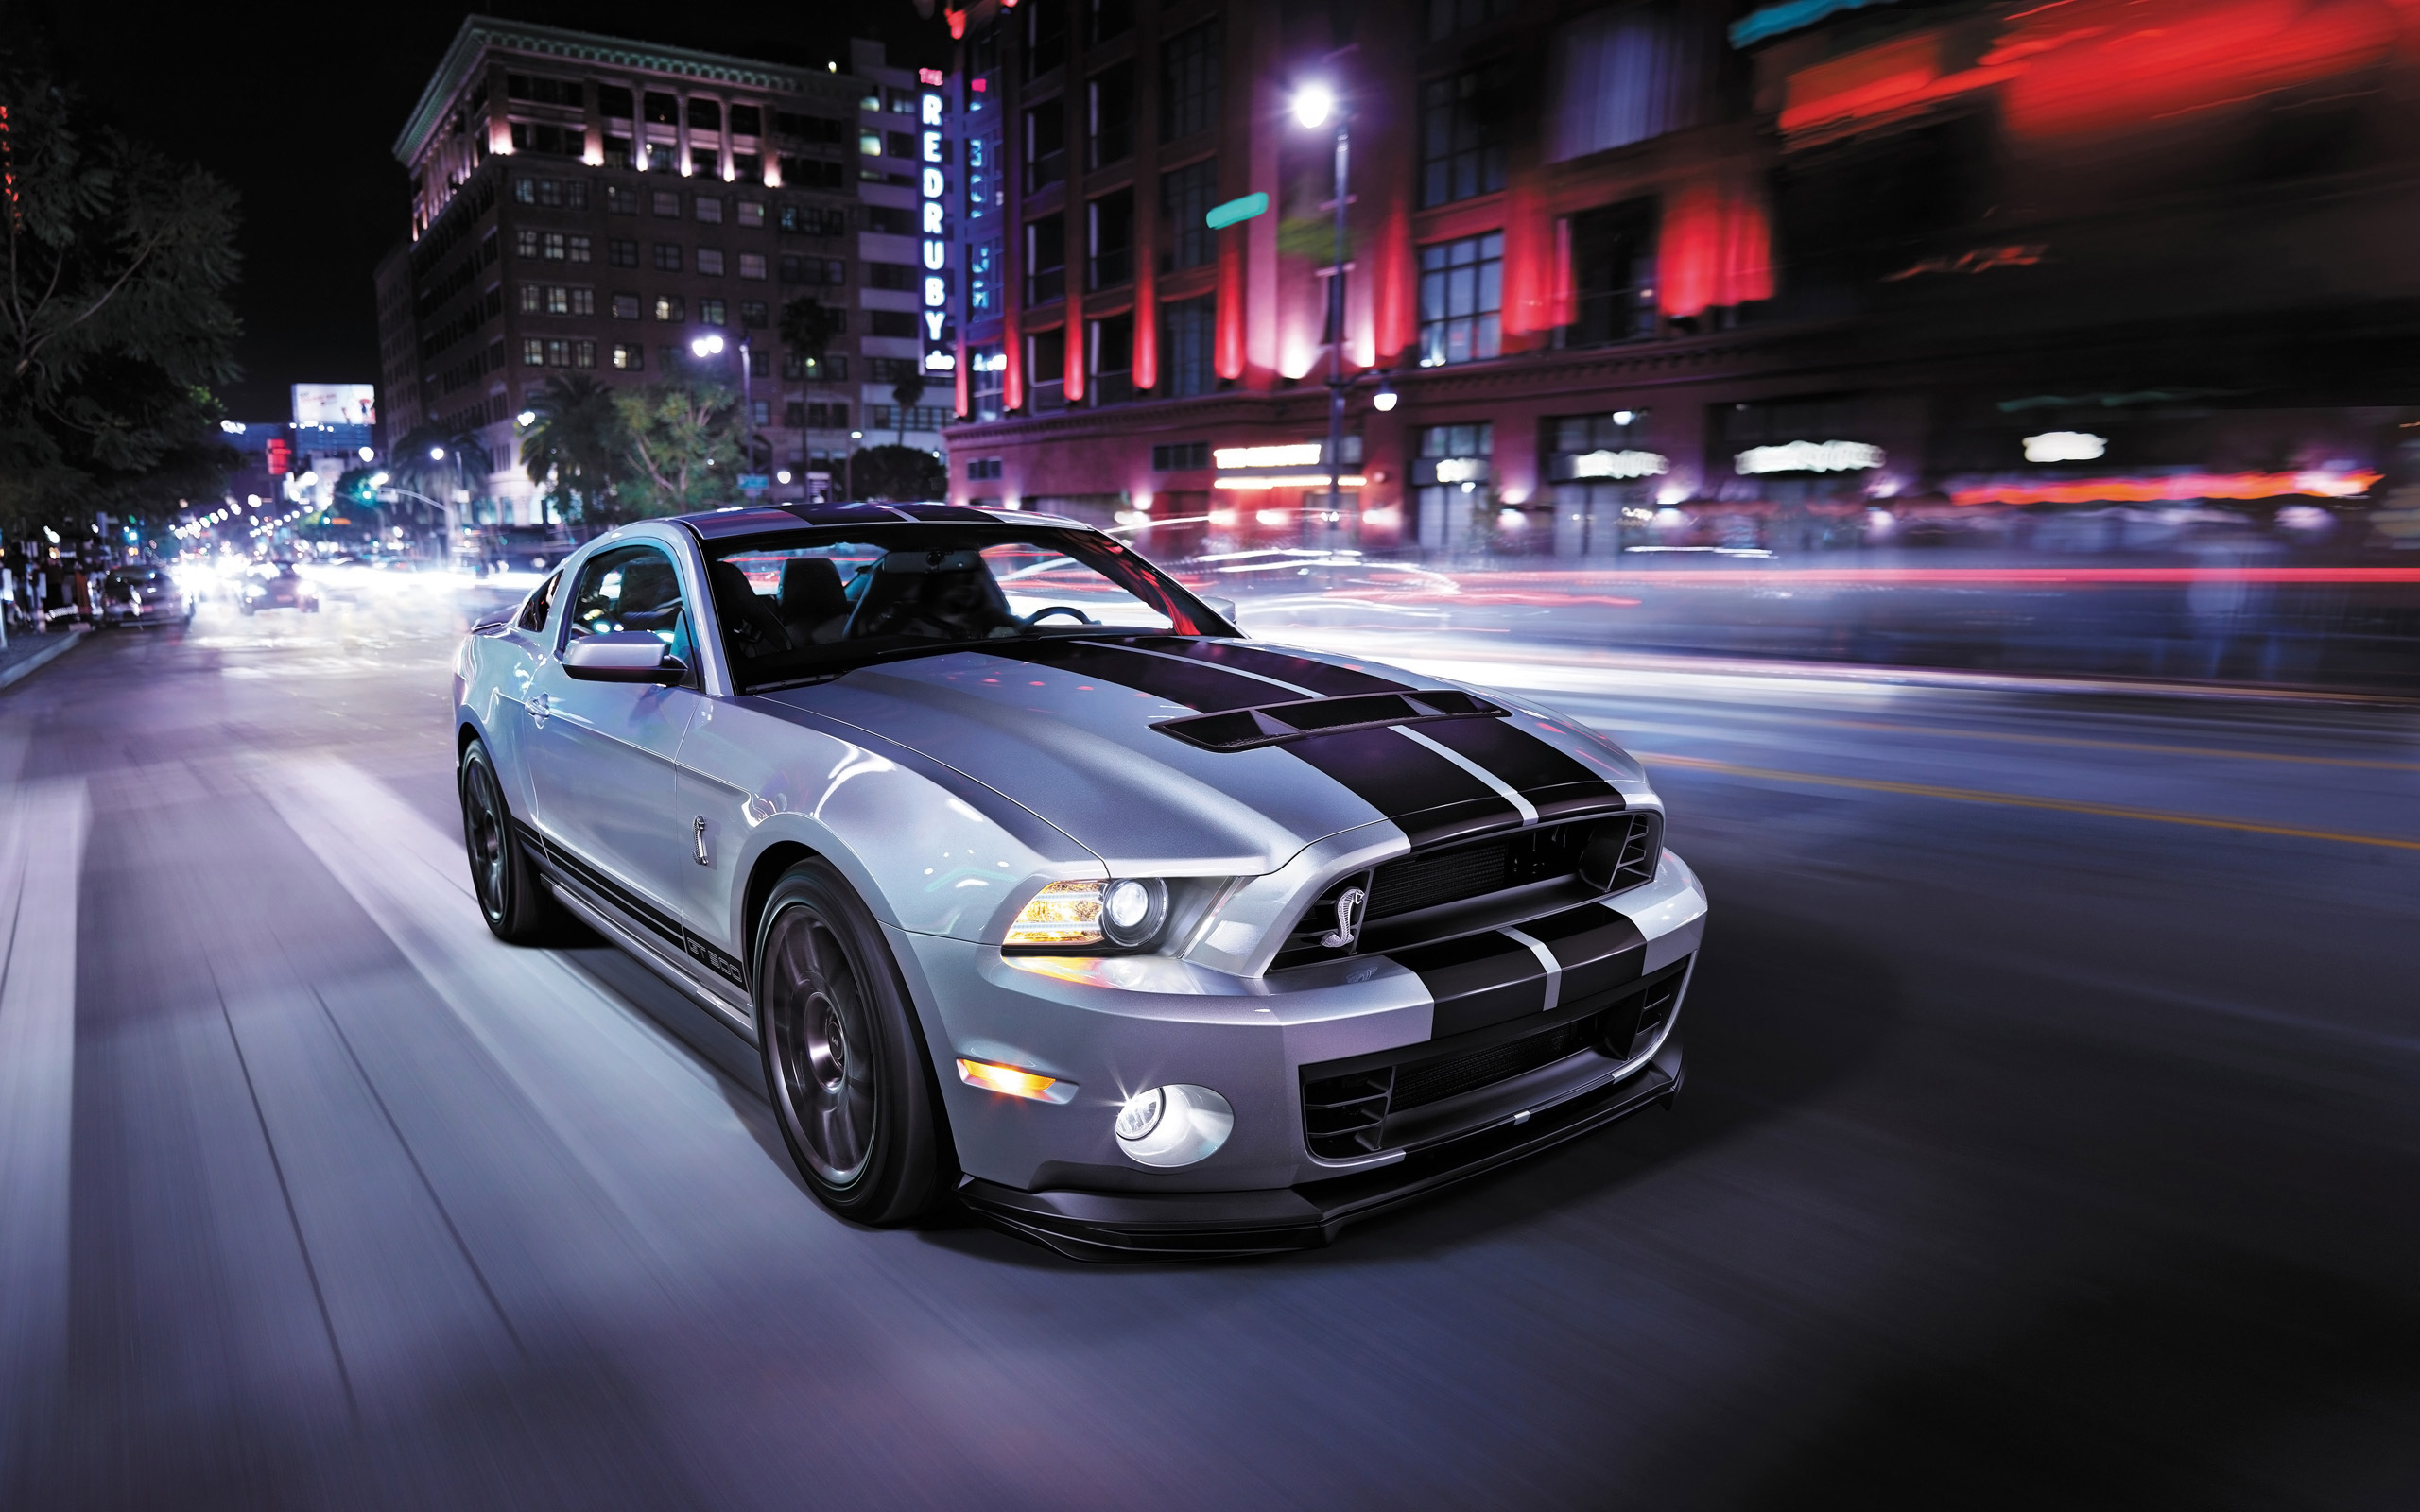 Ford Shelby GT500 2014 Wallpaper | HD Car Wallpapers | ID #3732